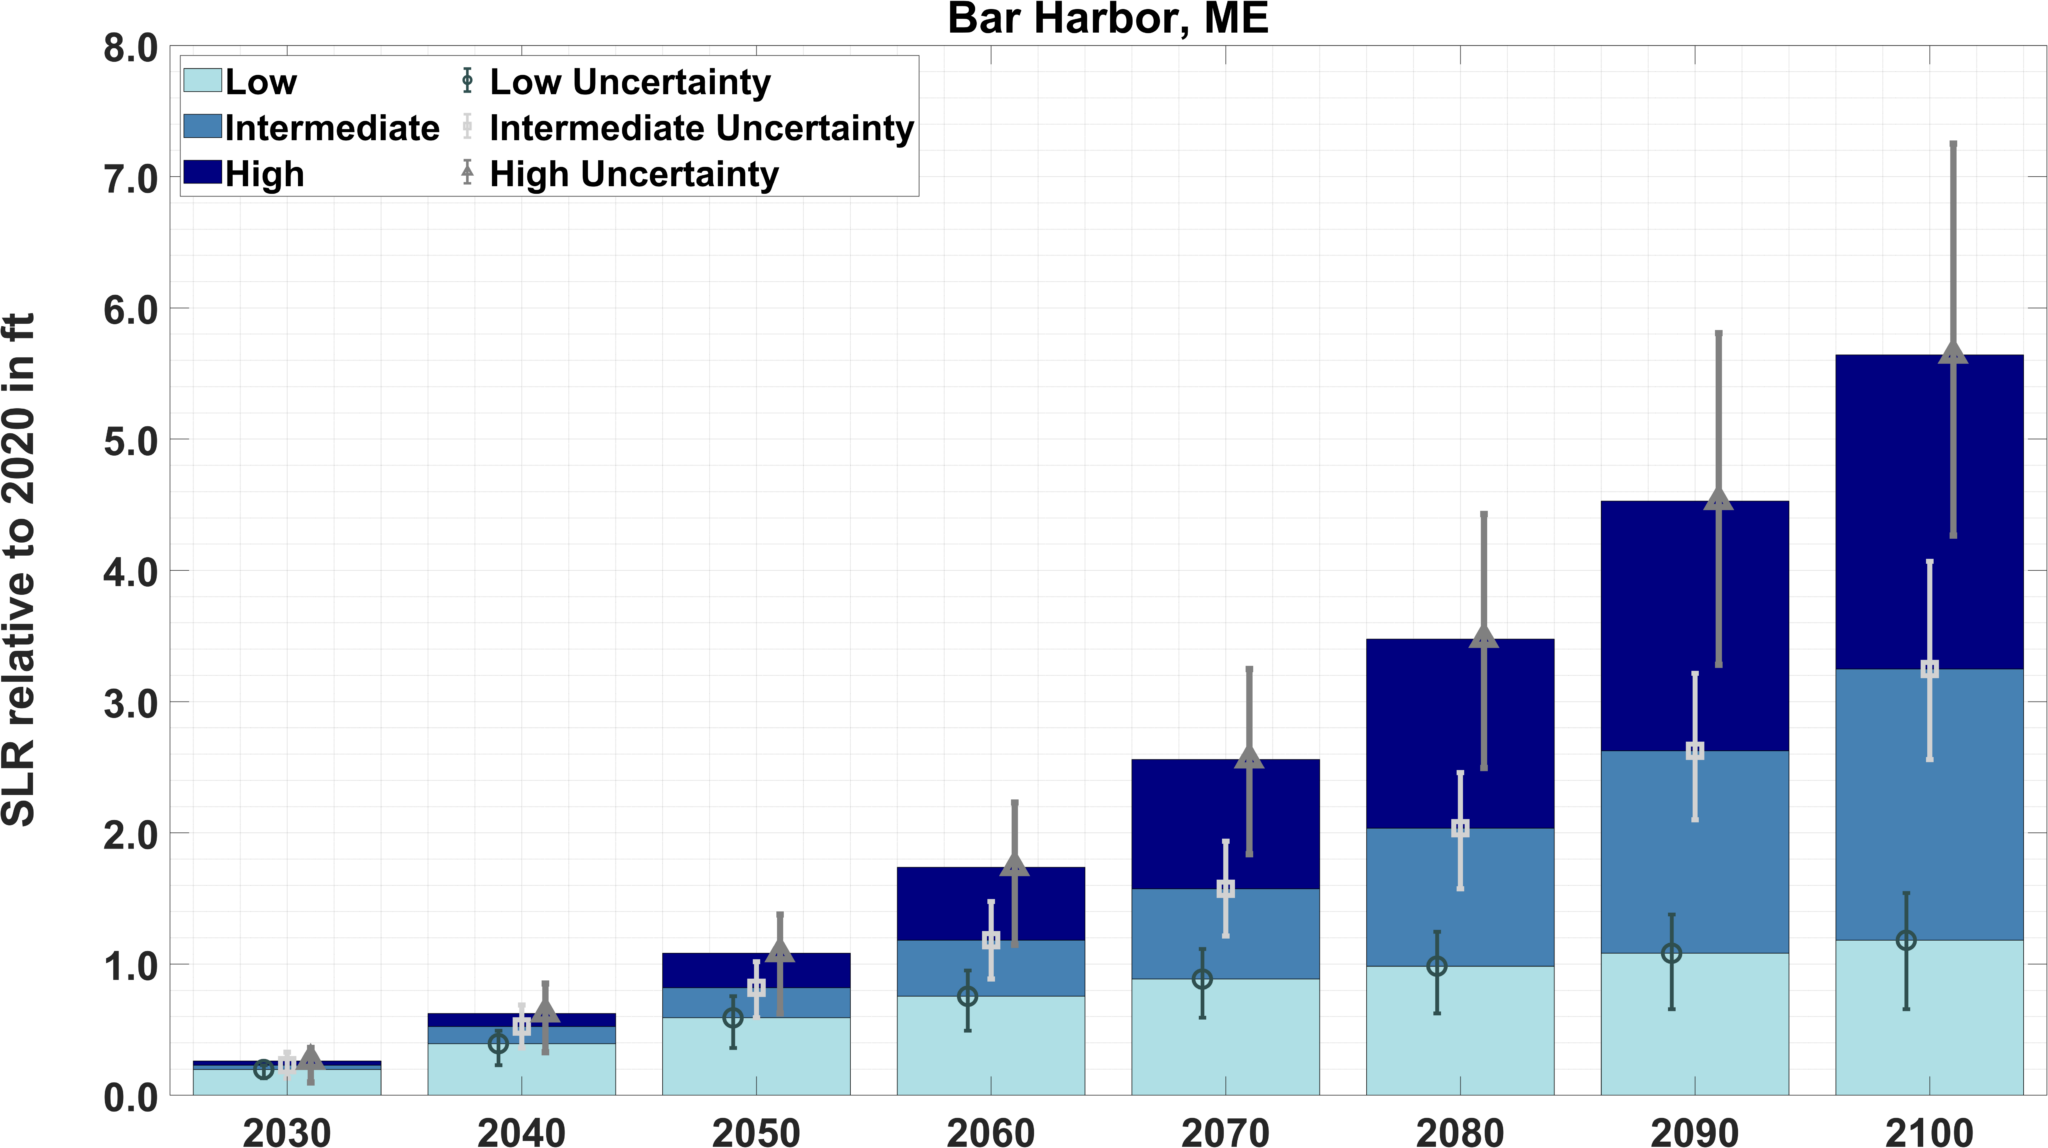 Bar chart showing projected sea level rise, with decades from 2030 to 2100 on the x-axis and feet on the y-axis. Bars are divided into low, intermediate, and high greenhouse gas concentration scenarios. Error bars show increasing uncertainty after 2050.